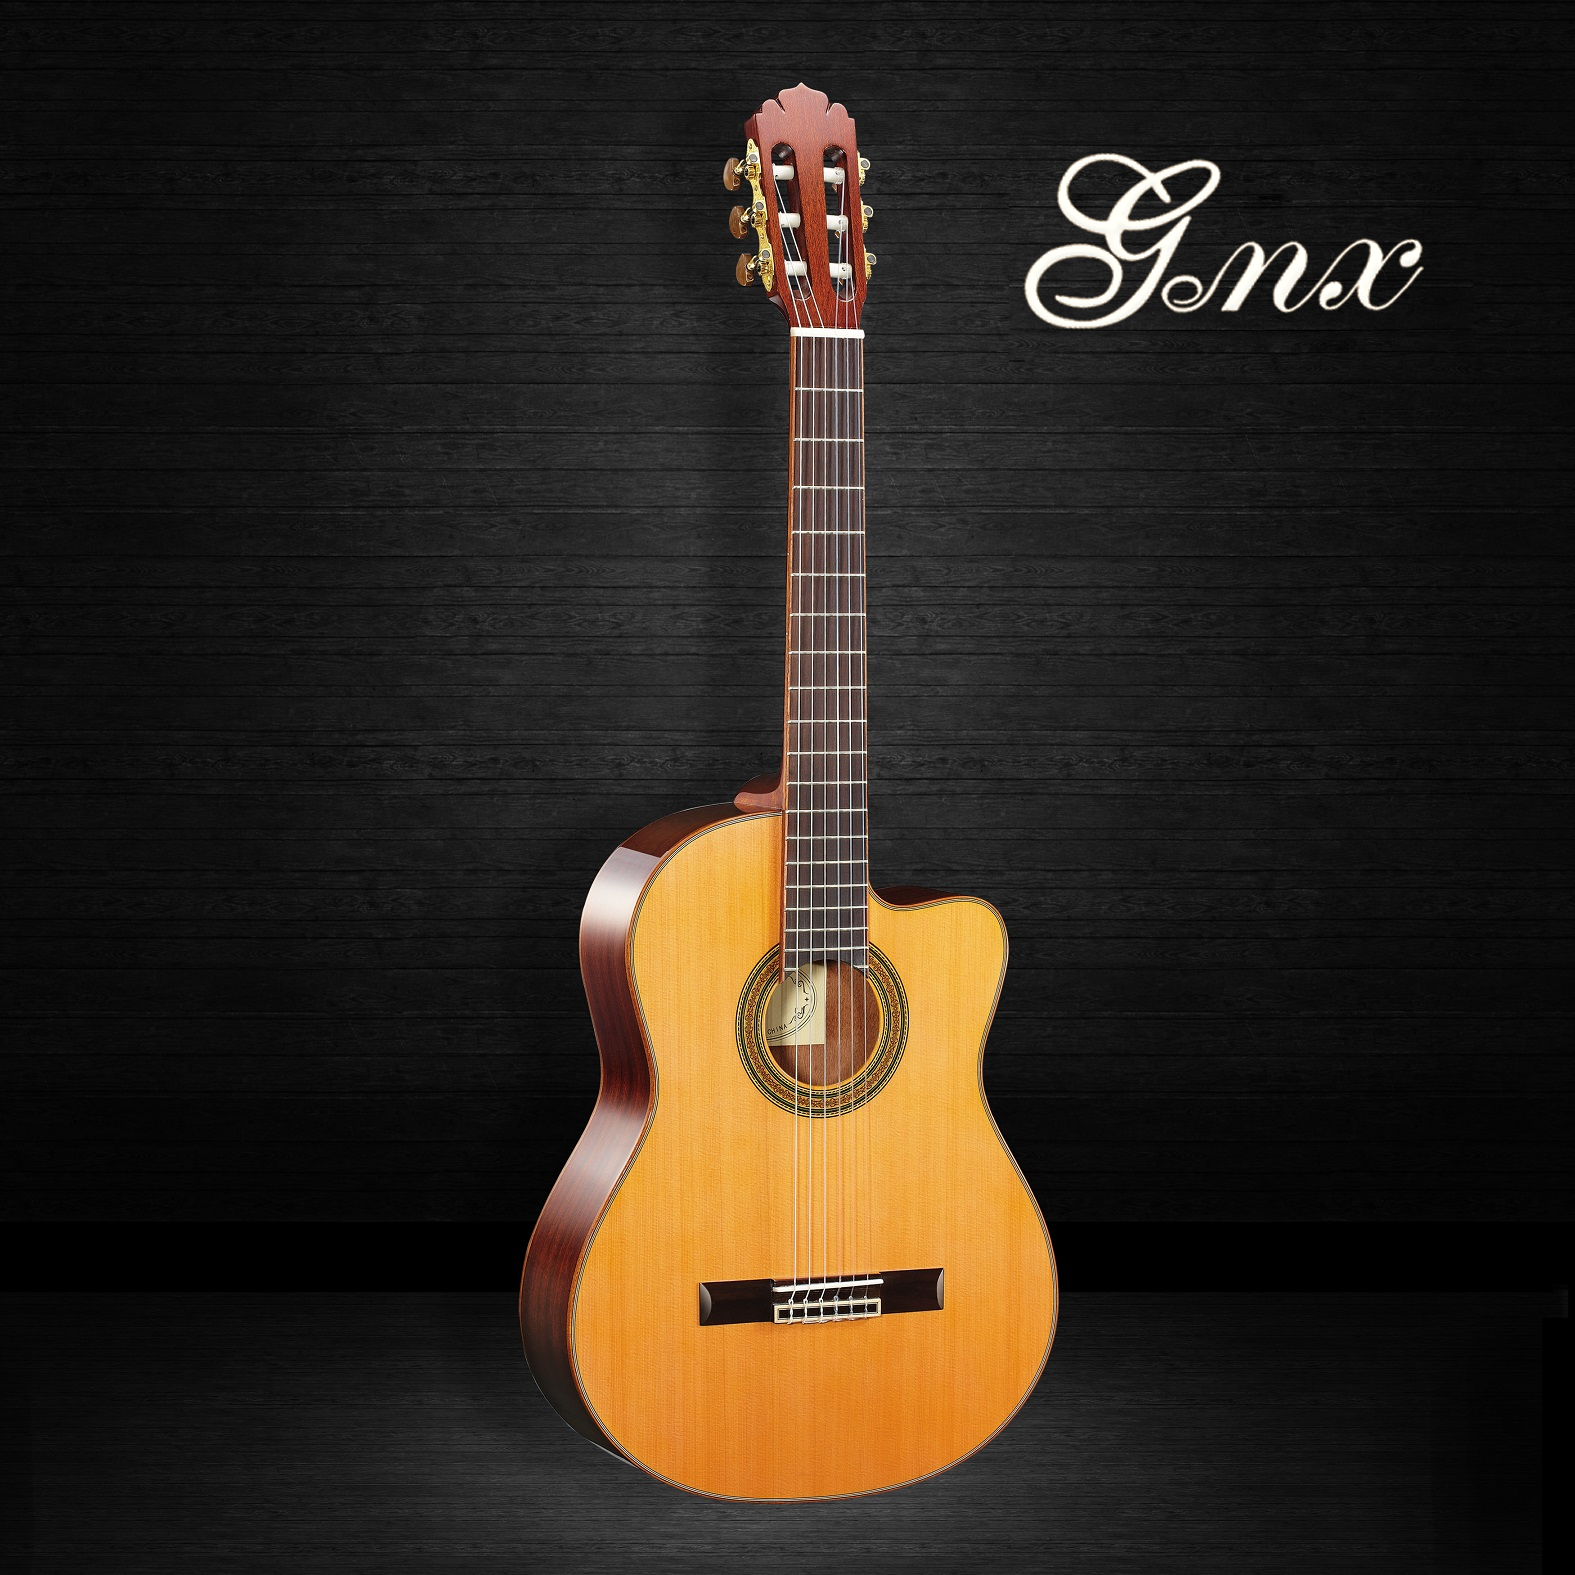 High quality of classical guitar cutaway from China